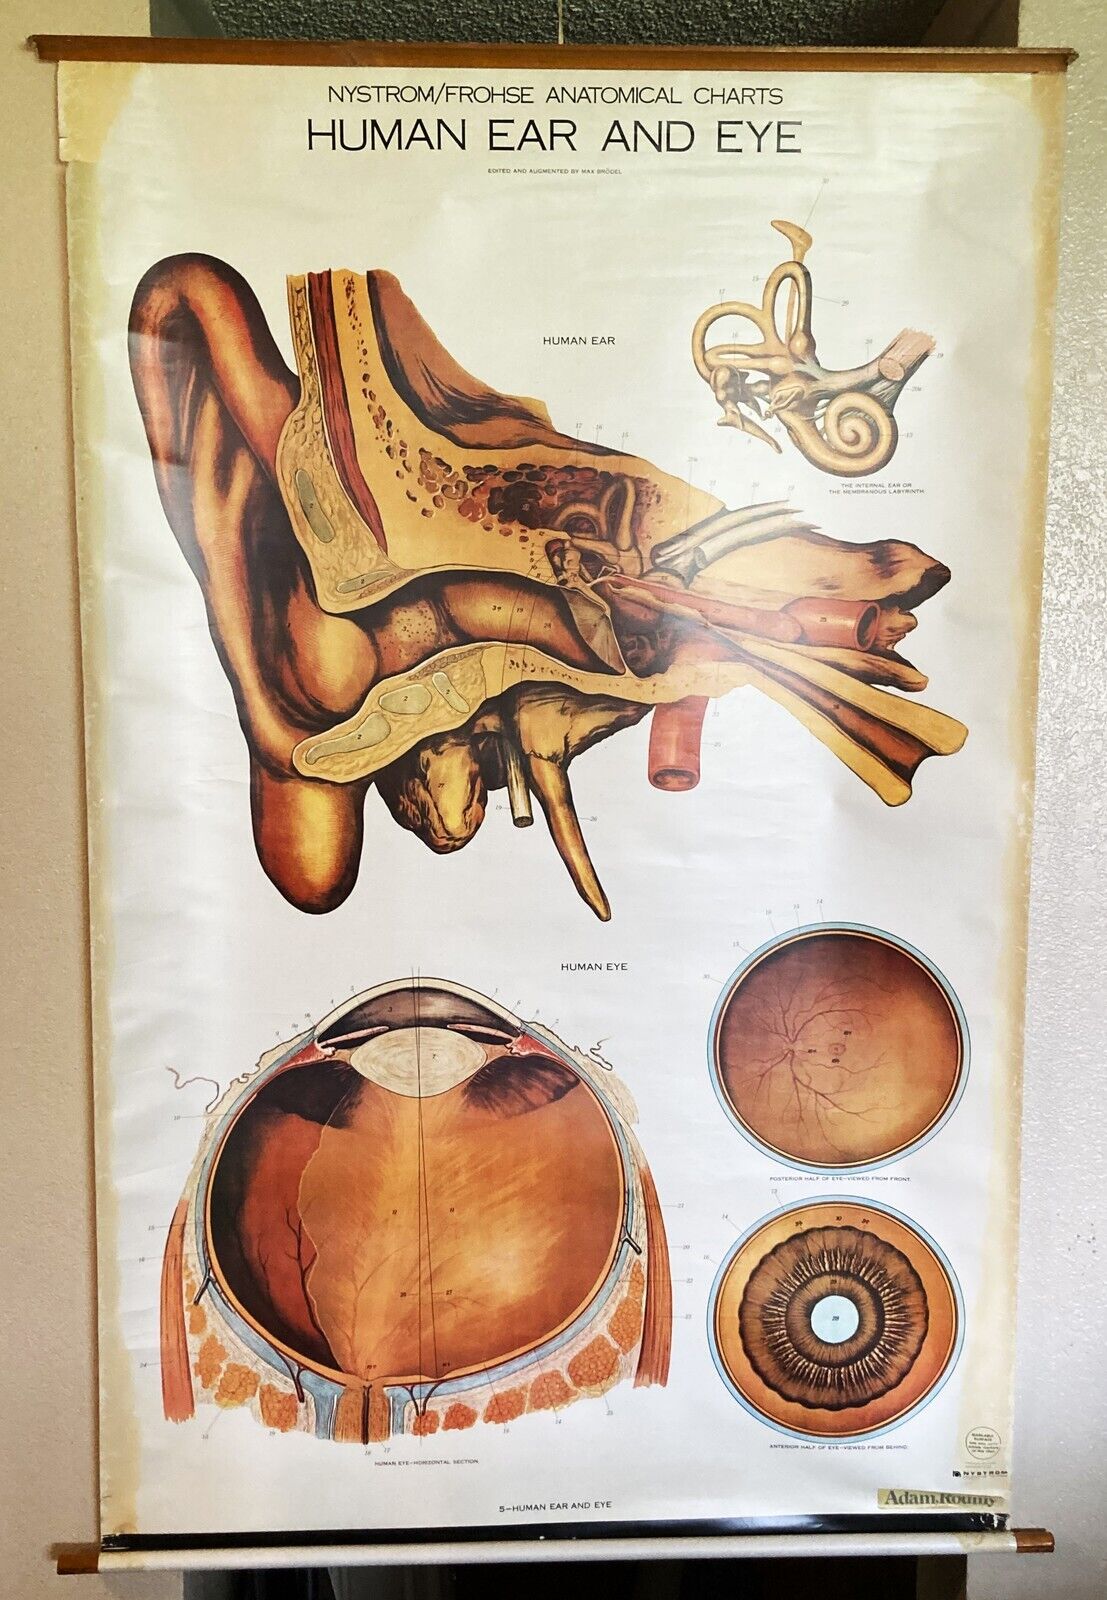 Vintage AJ Nystrom & Co. - Eye and Ear Anatomical Teaching Chart - 1918